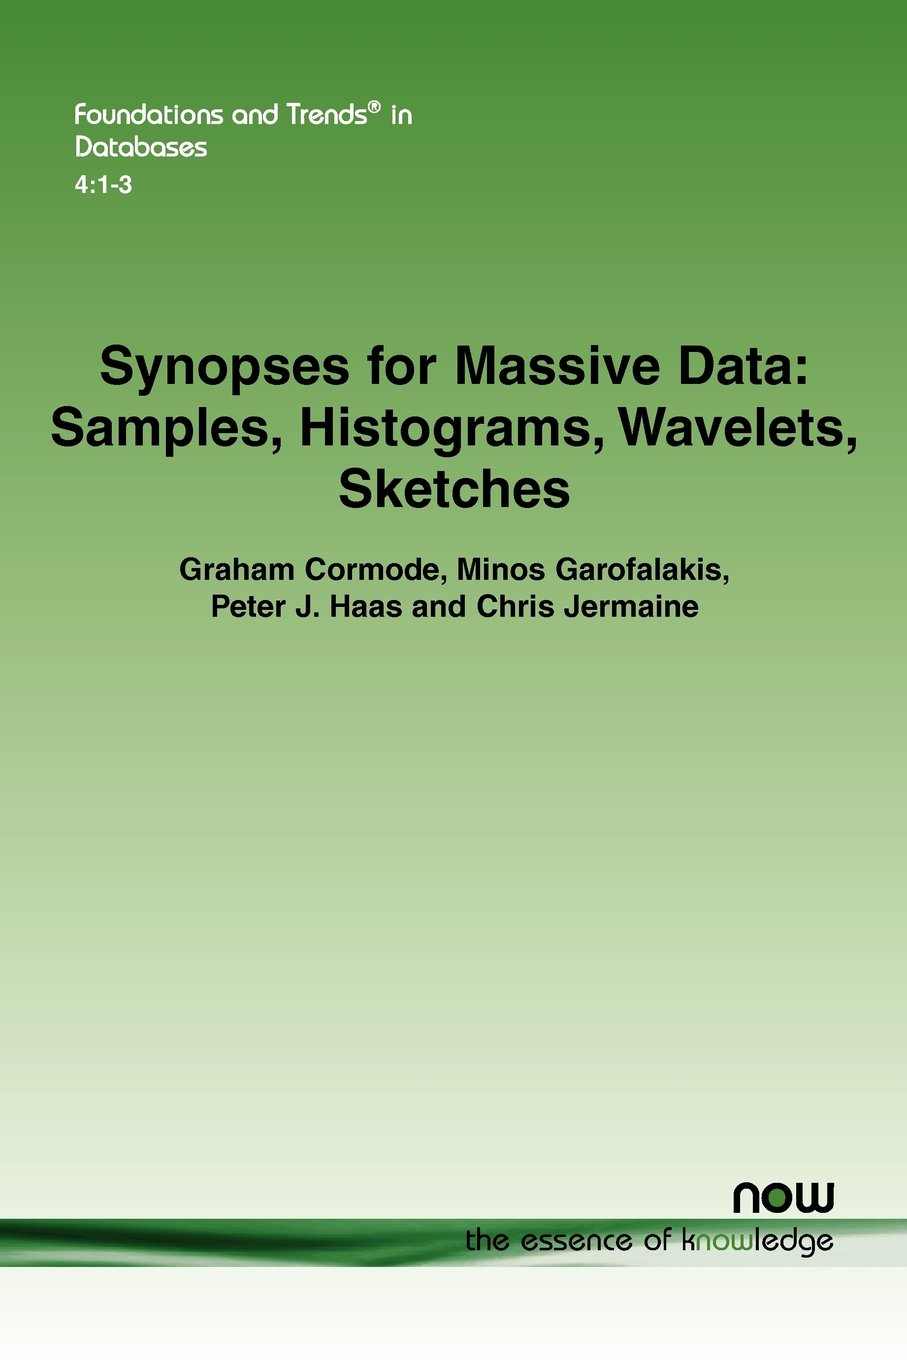 Synopses for Massive Data: Samples, Histograms, Wavelets, and Sketches